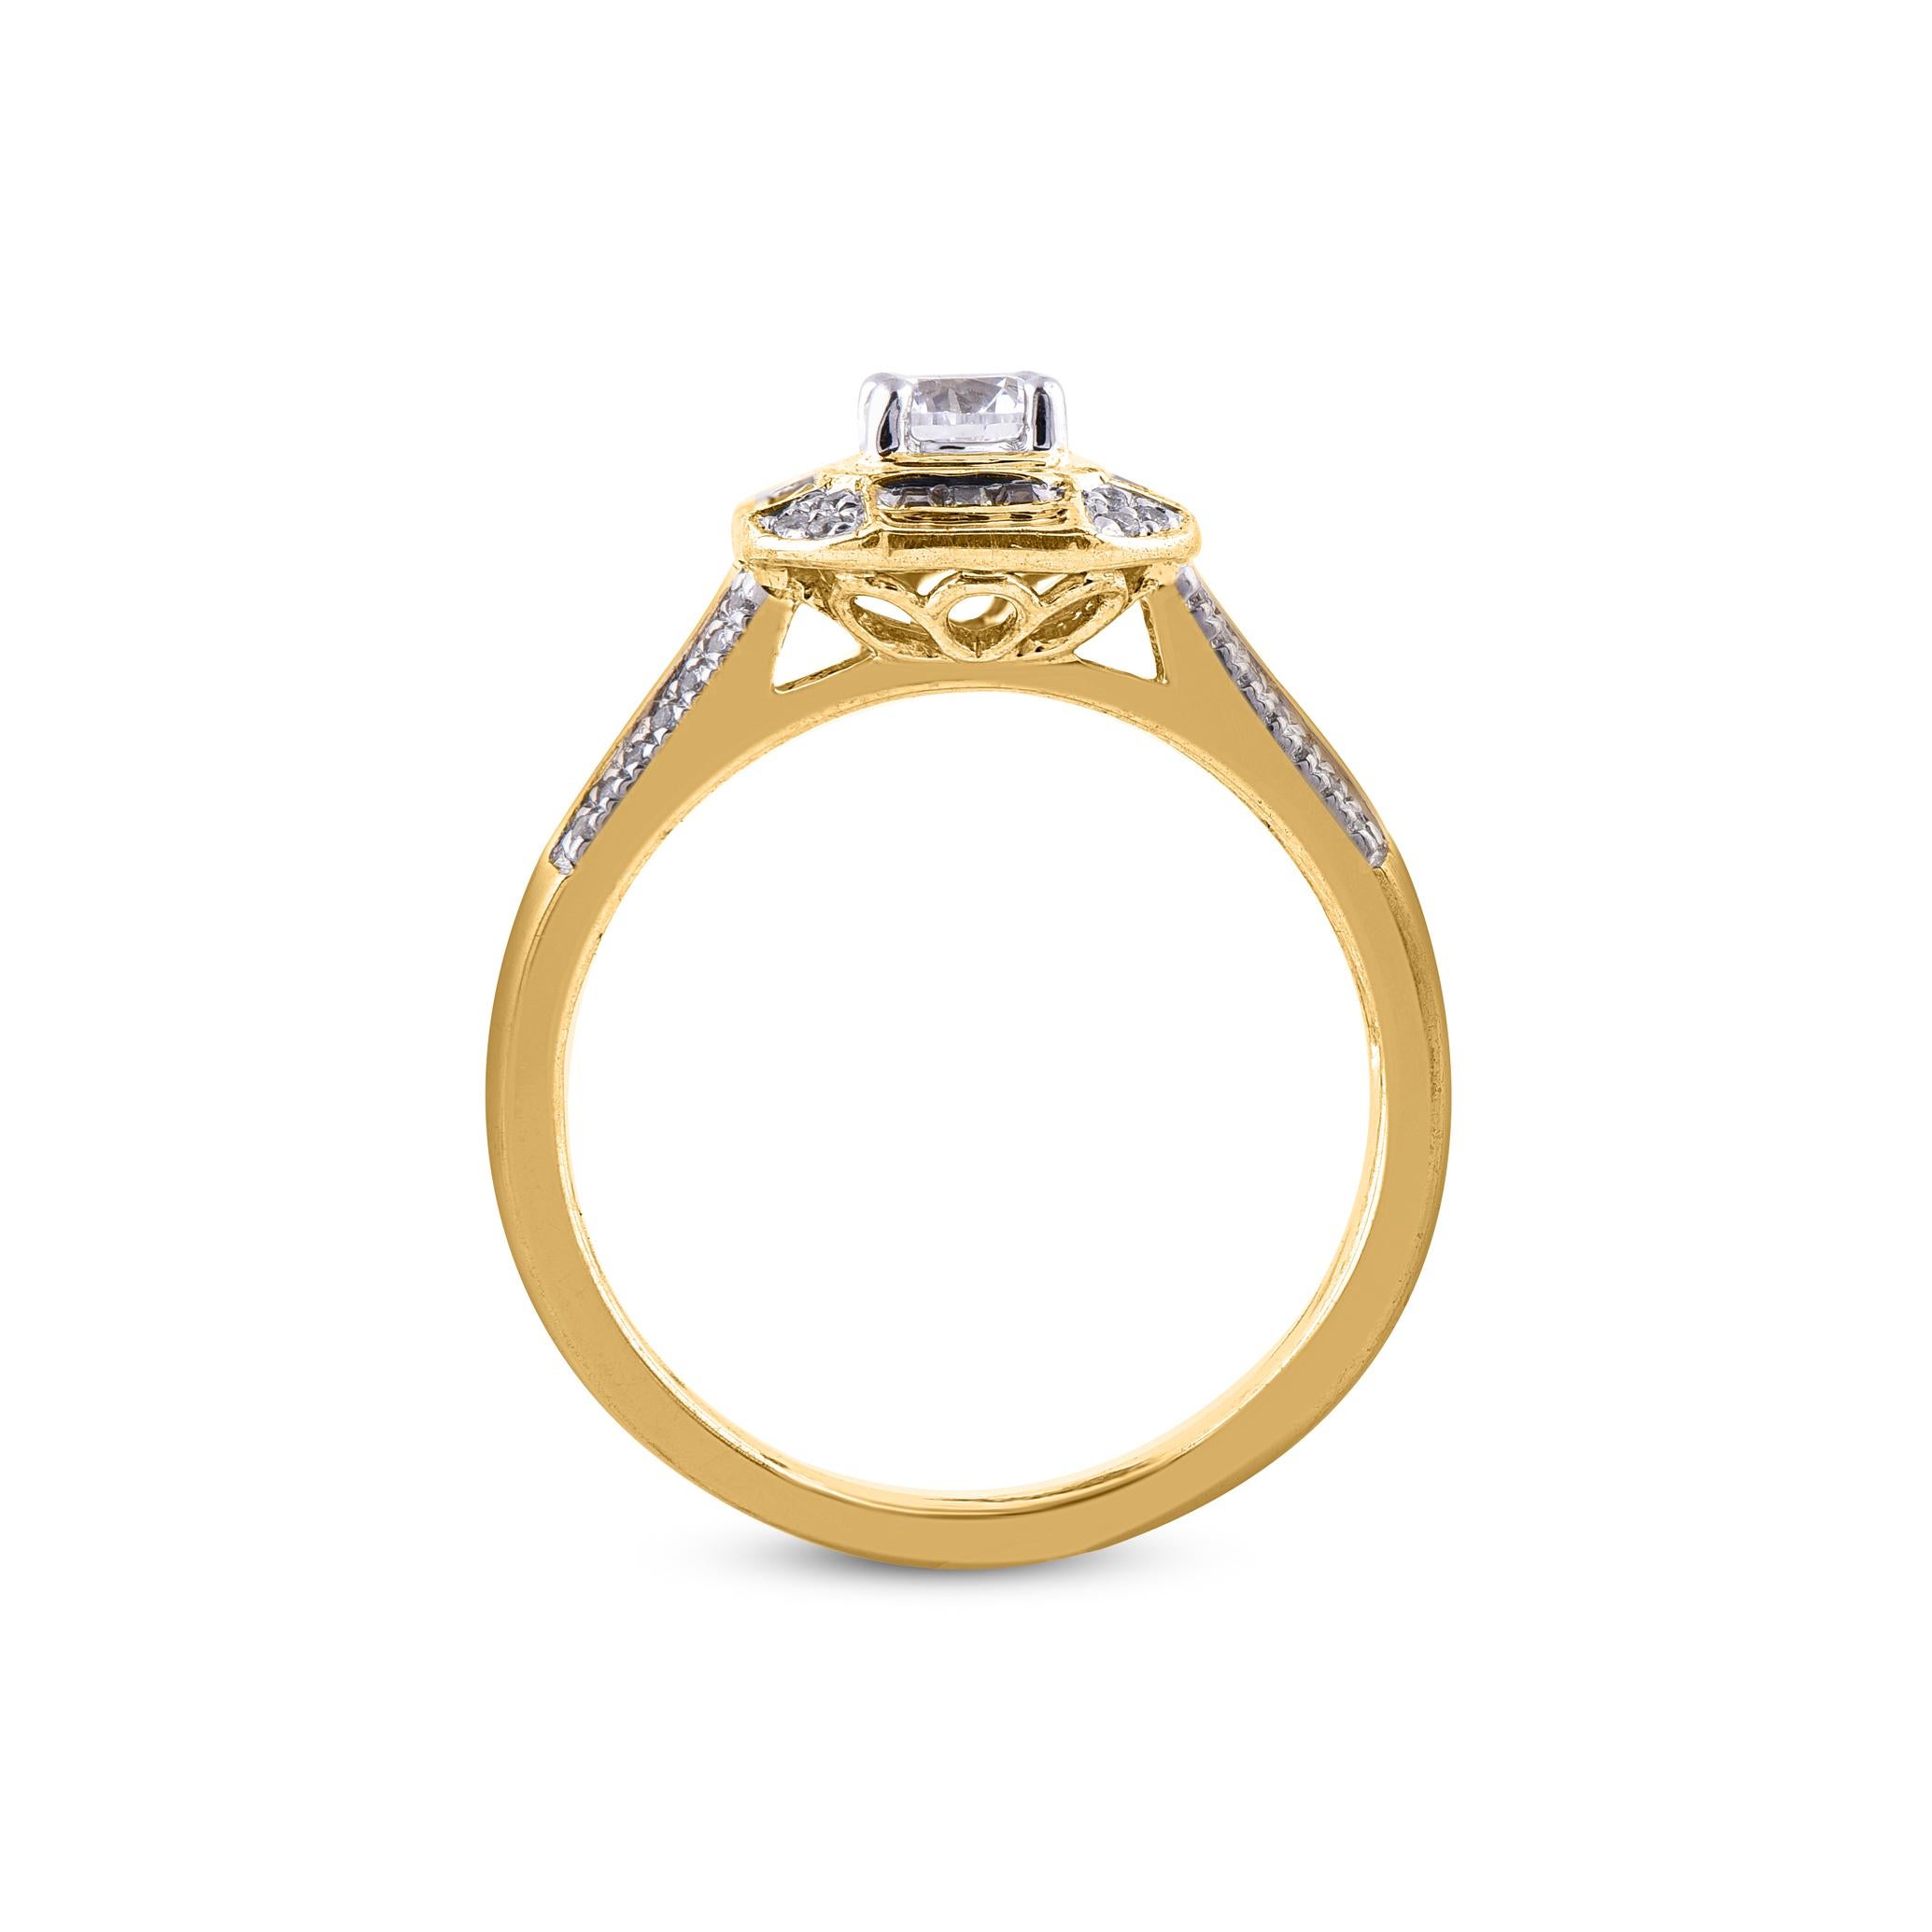 TJD 0.50 Carat Round & Baguette Diamond 18Karat Yellow Gold Designer Bridal Ring In New Condition For Sale In New York, NY